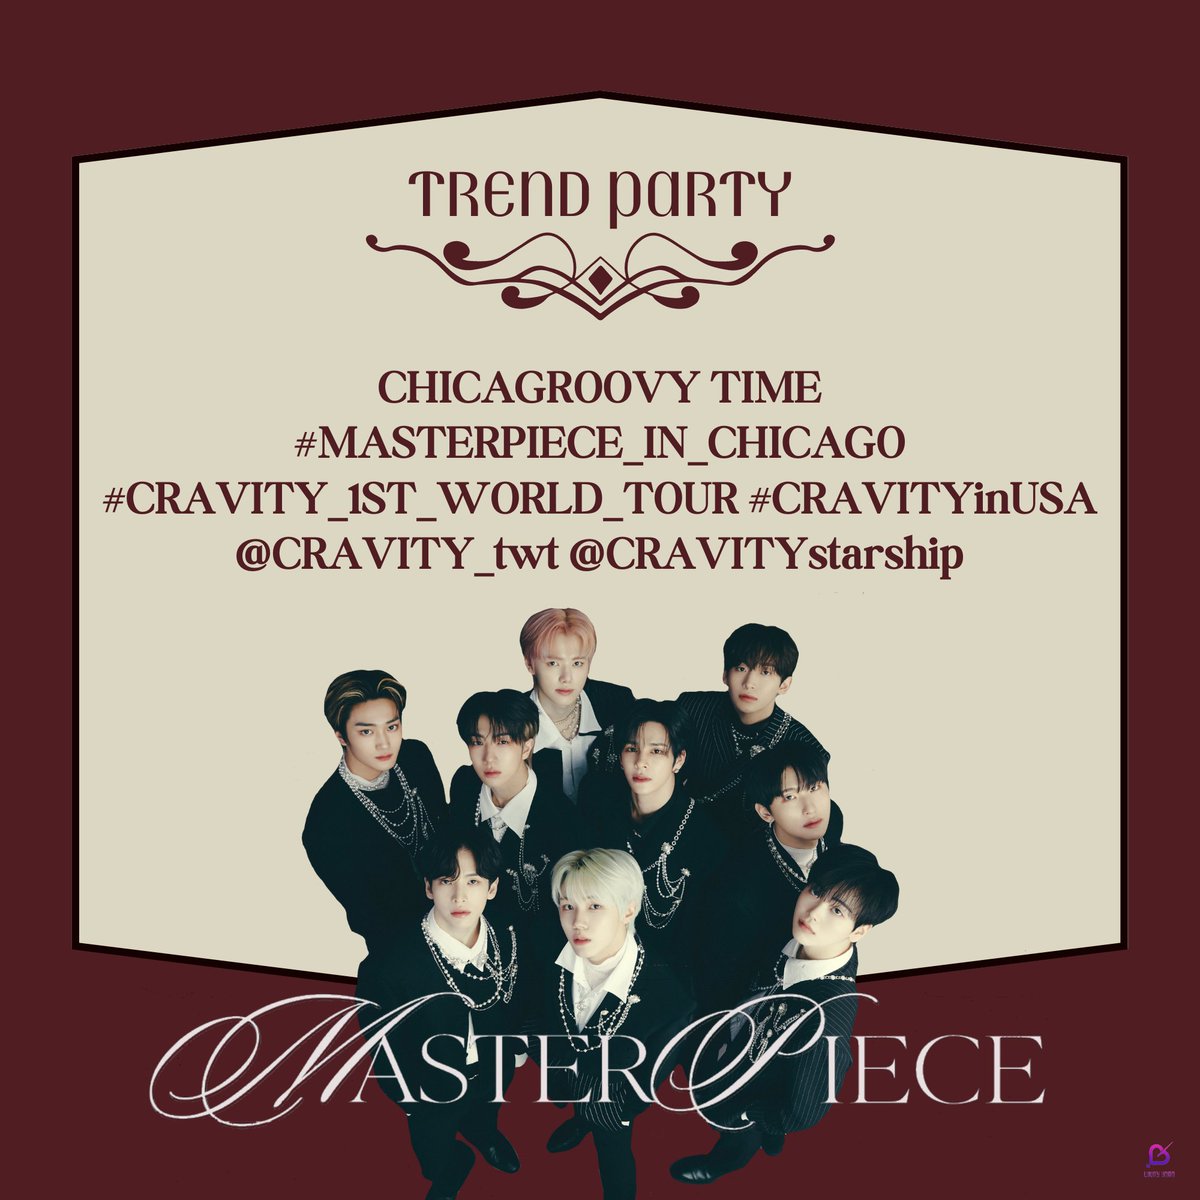 🎉 TREND PARTY 🎉

Time for Chicago luvity to experience the rush as CRAVITY takes Masterpiece to Copernicus Center! Let's continue party rockin' and drop tags!

CHICAGROOVY TIME
#MASTERPIECE_IN_CHICAGO
#CRAVITY_1ST_WORLD_TOUR #CRAVITYinUSA 
@CRAVITY_twt @CRAVITYstarship